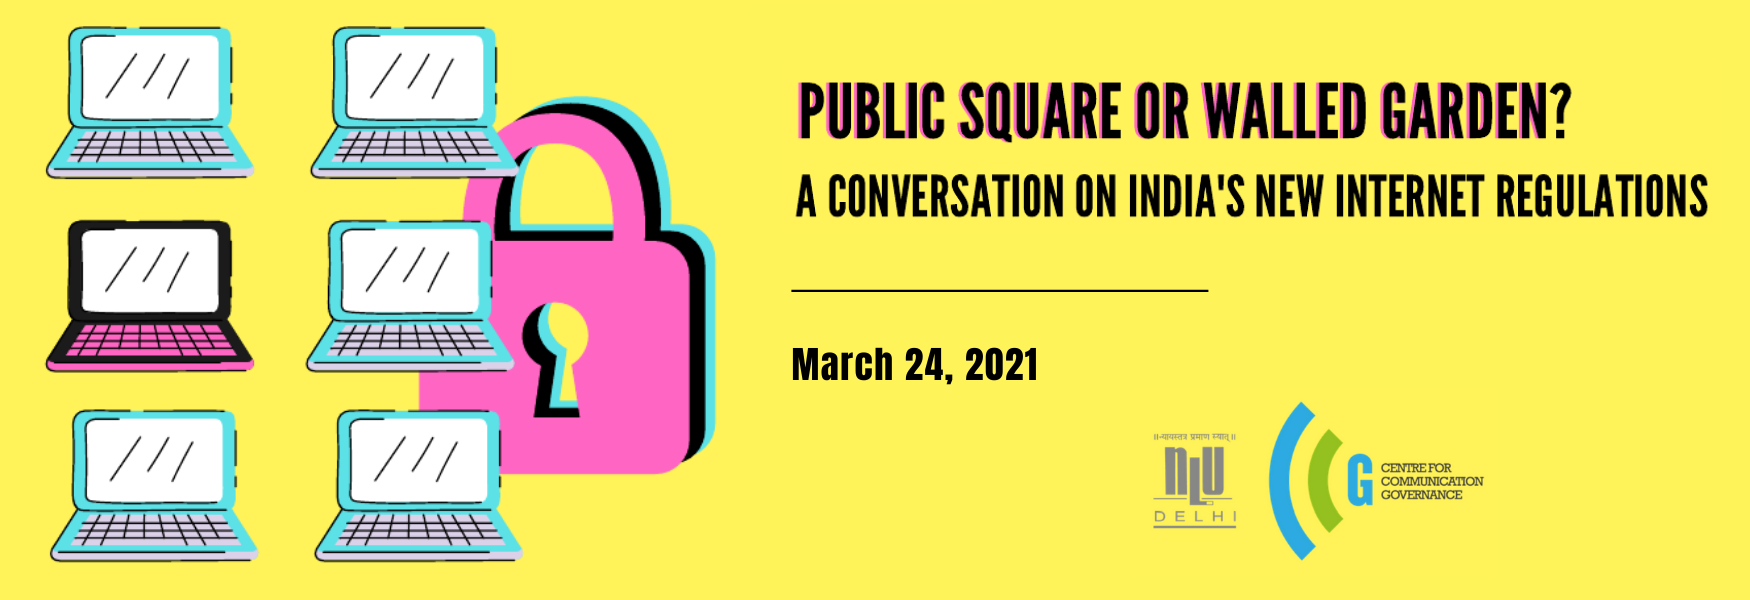 Public Square or Walled Garden? A Conversation on India's New Internet Regulations